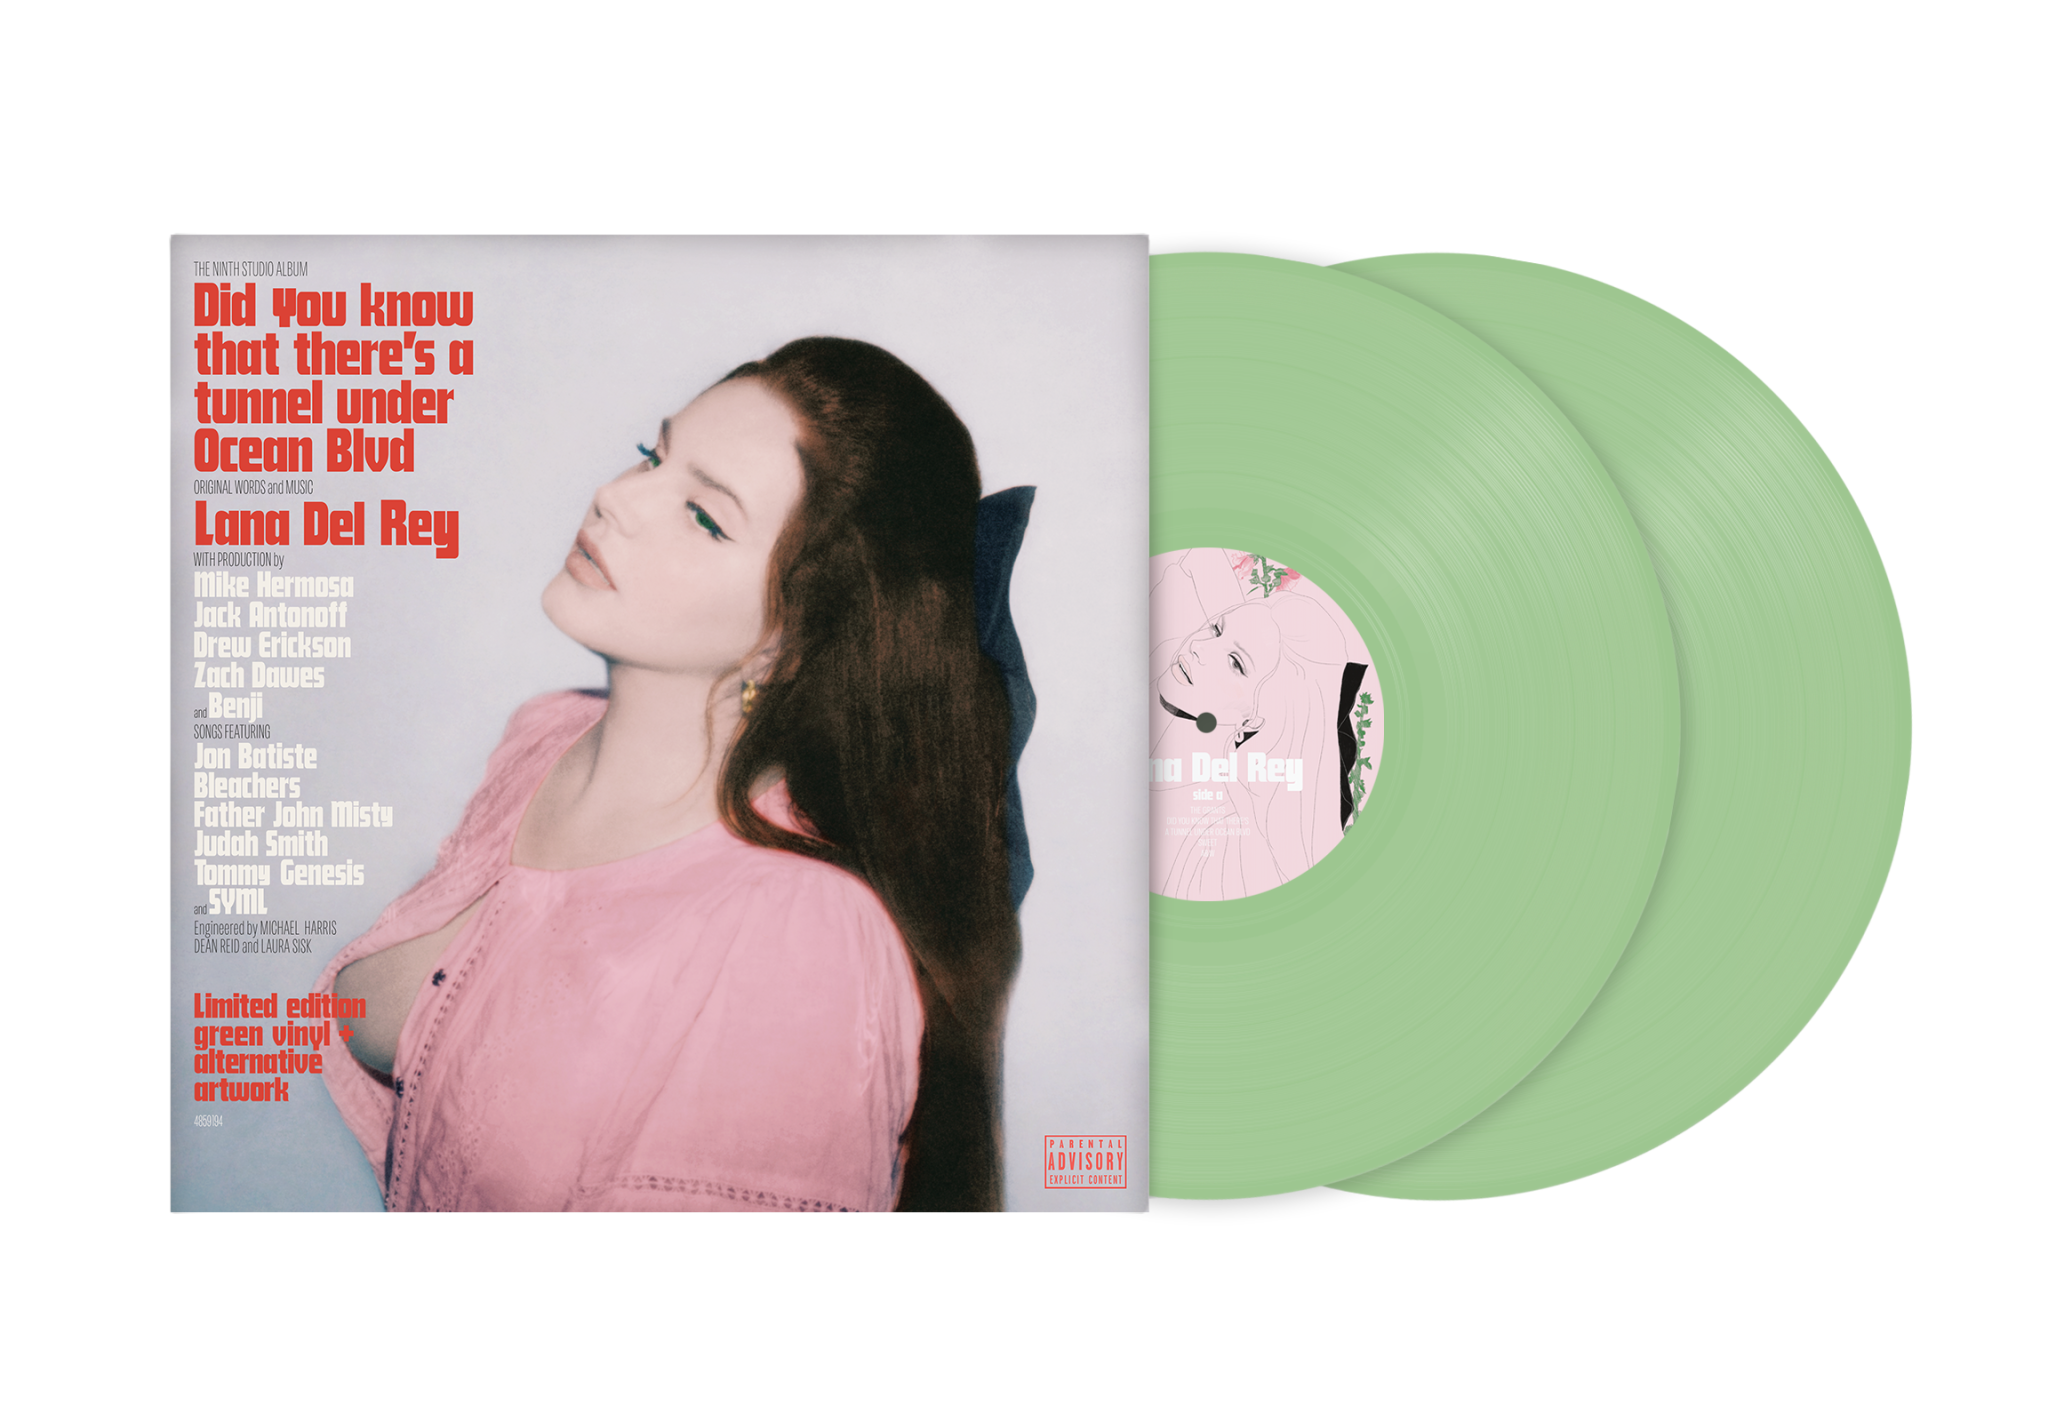 Interscope Records Lana Del Rey - Did you know that there's a tunnel under Ocean Blvd (Green Vinyl)